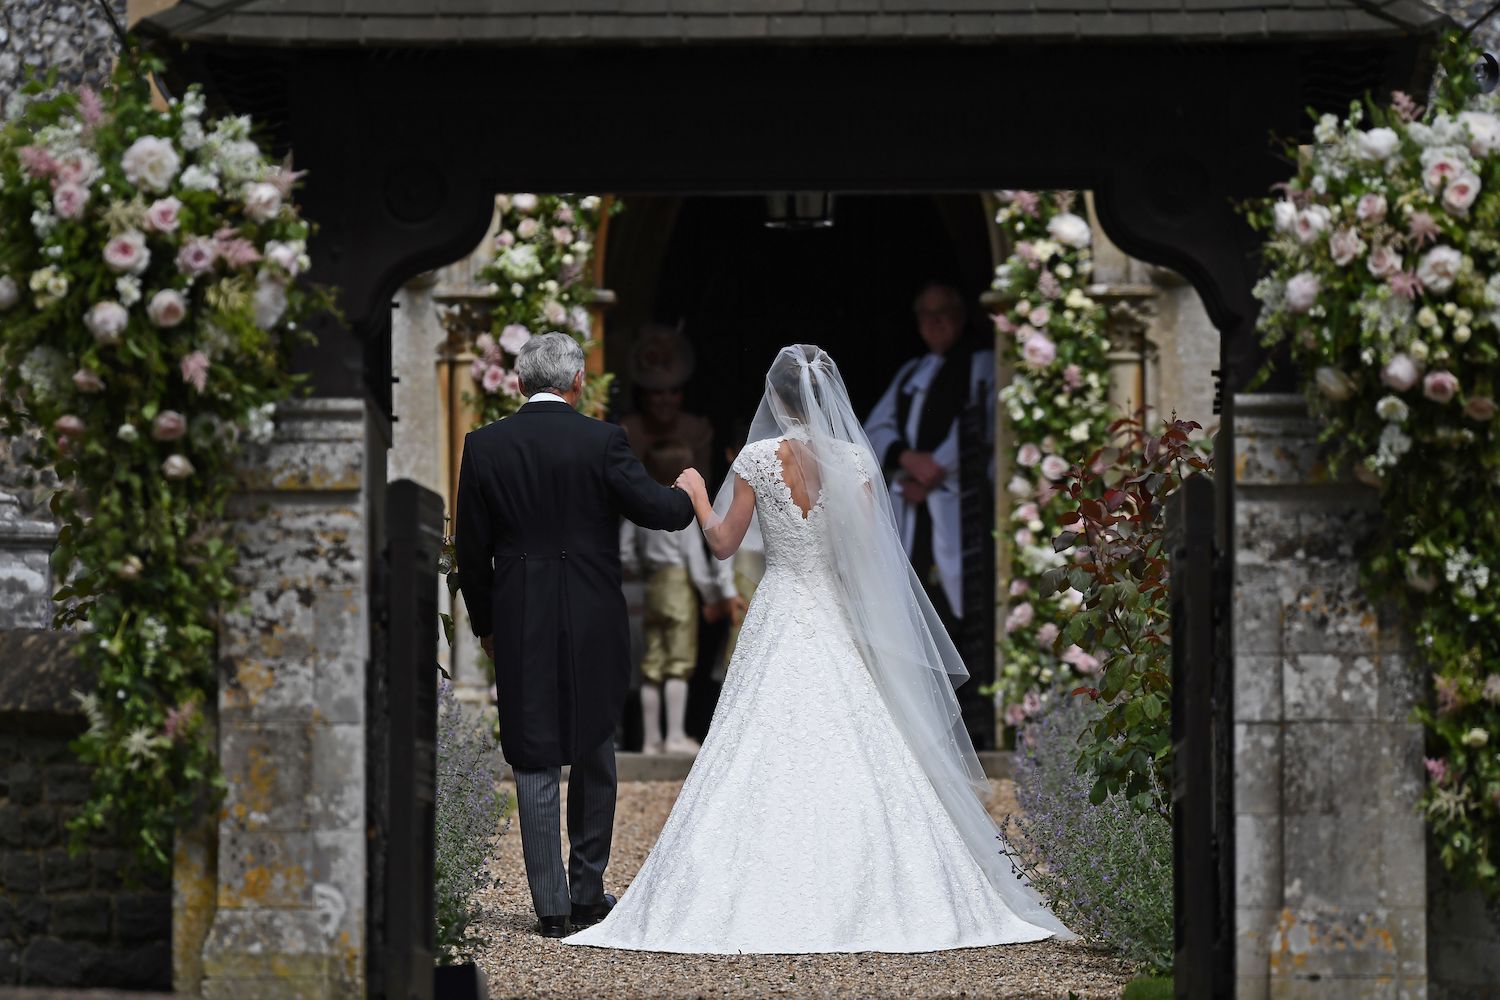 Pippa Middleton showed off her toned back but, unlike when she was a bridesmaid, kept her famous backside under wraps